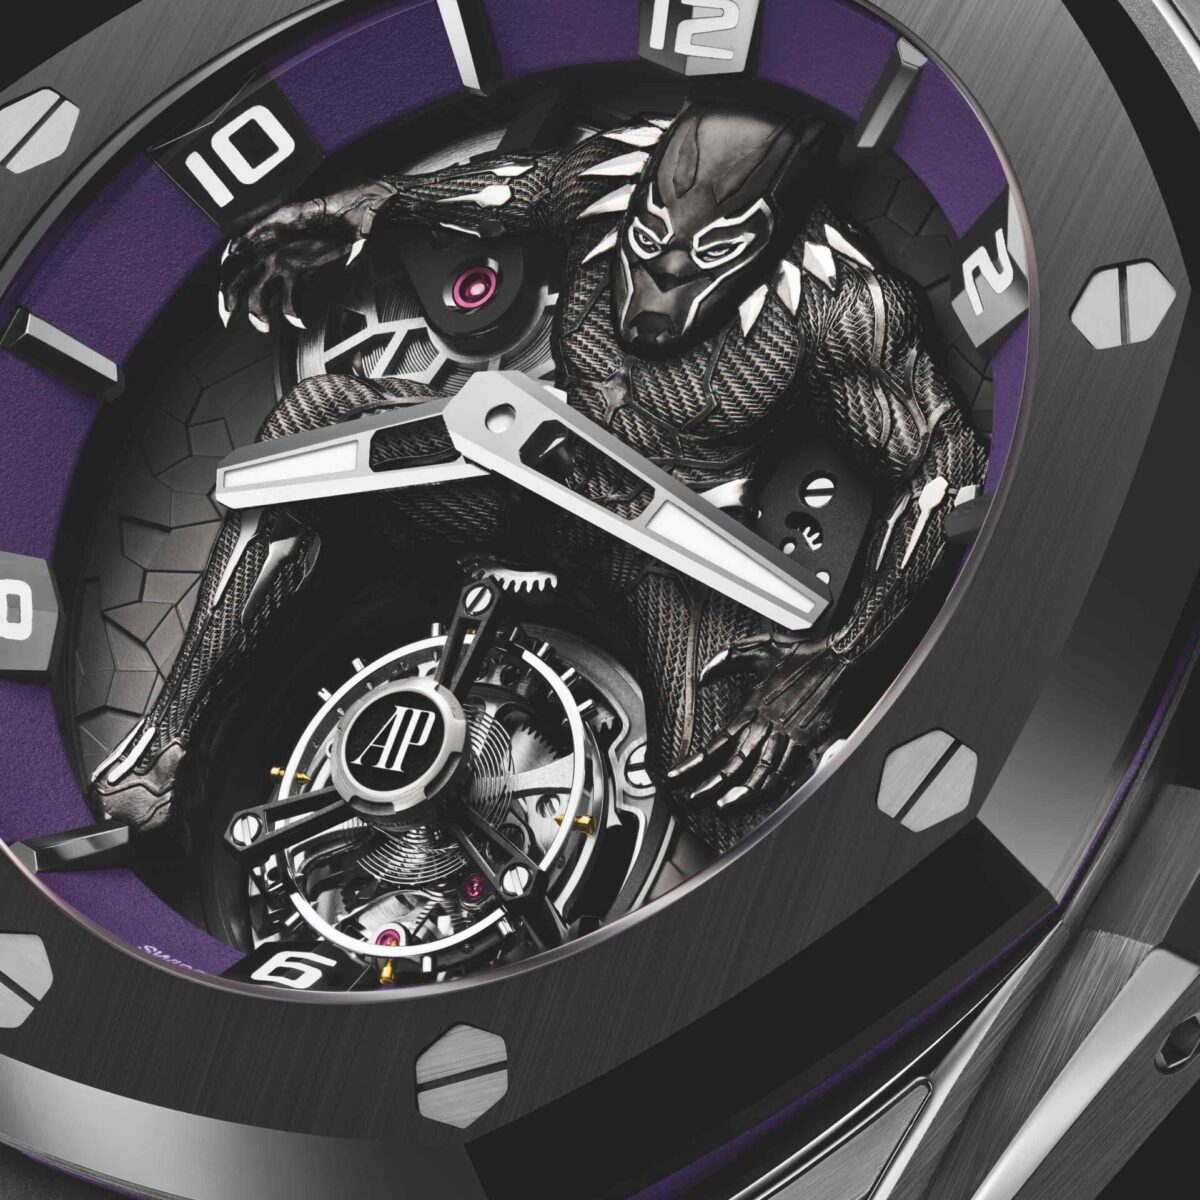 The RO Concept Black Panther is powered by the manual-wind cal. 2965, regulated by its flying tourbillon at 6 o'clock.